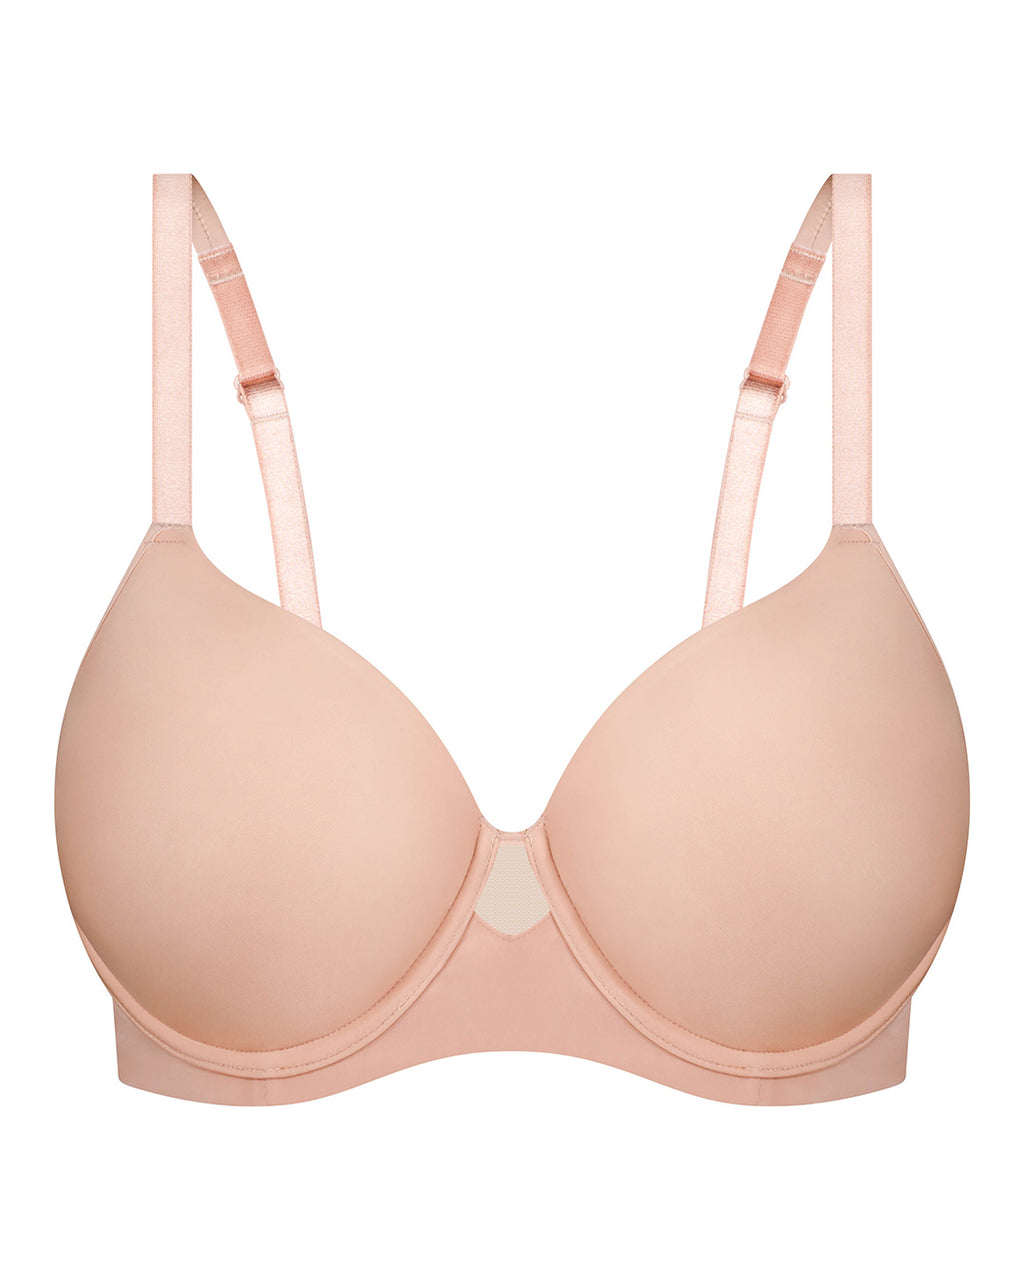 Lingadore Daily Uni-Fit T-Shirt Bra In Antique rose – The Fitting